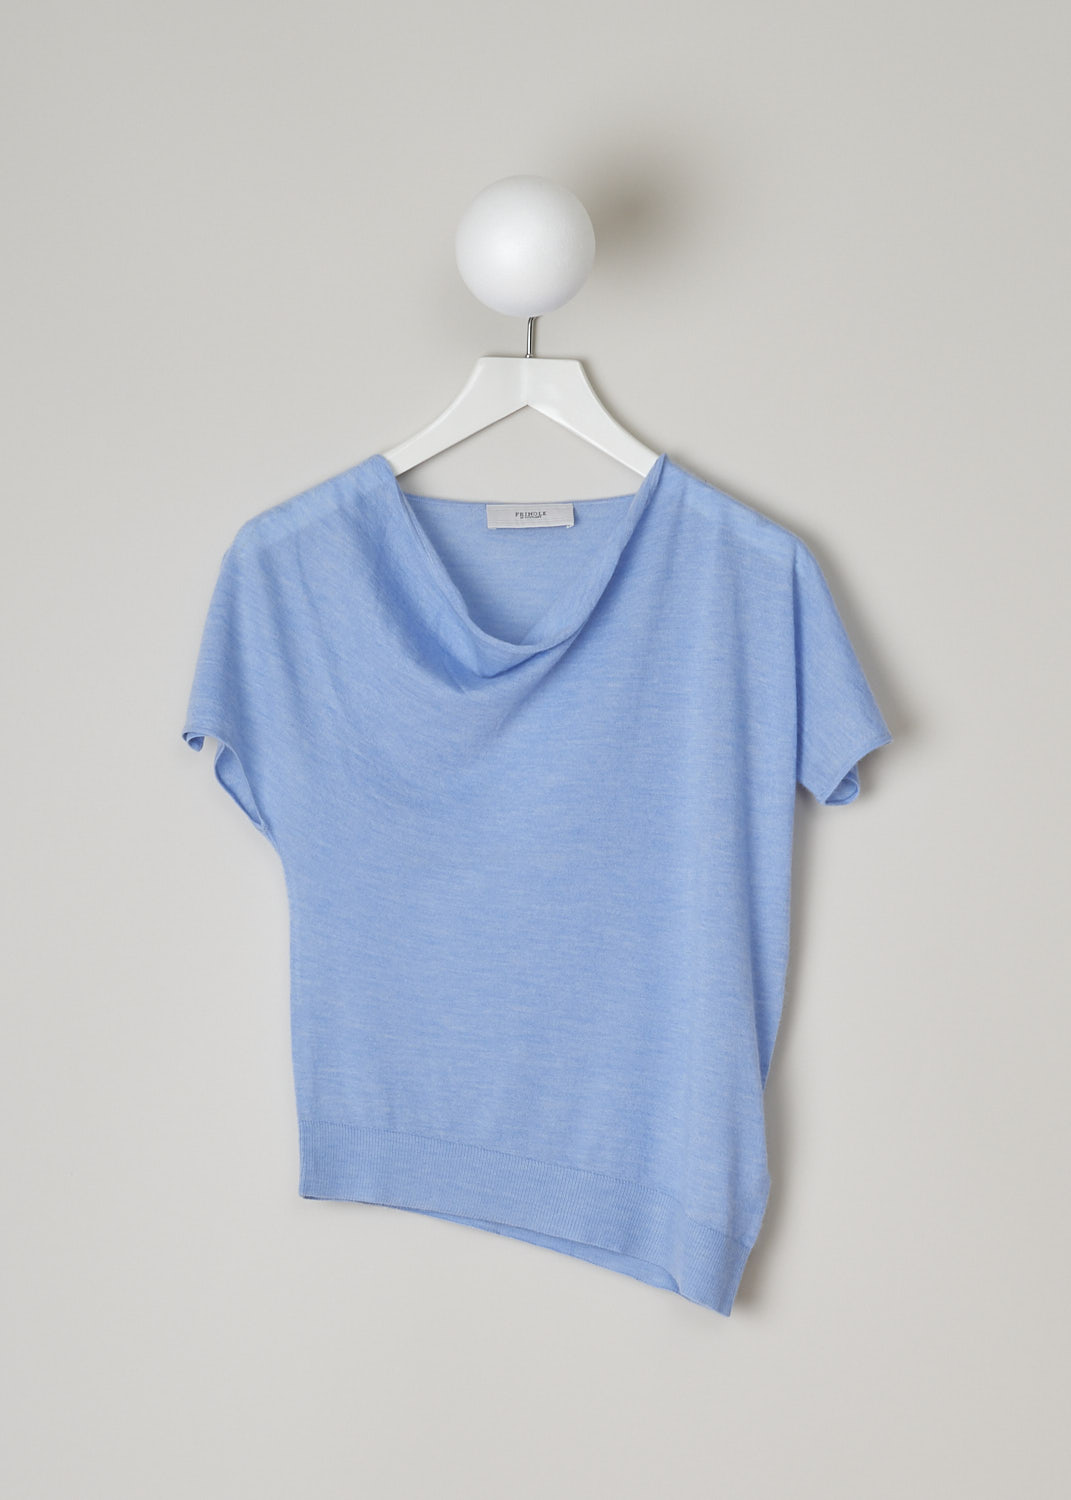 PRINGLE OF SCOTLAND, LIGHT BLUE CASHMERE TOP, WTE018_2885_LIGHT_BLUE_MELANGE, Blue, Front, This light blue cashmere top has a cowl neck and short cap sleeve. The top has a ribbed, asymmetric hemline. 
